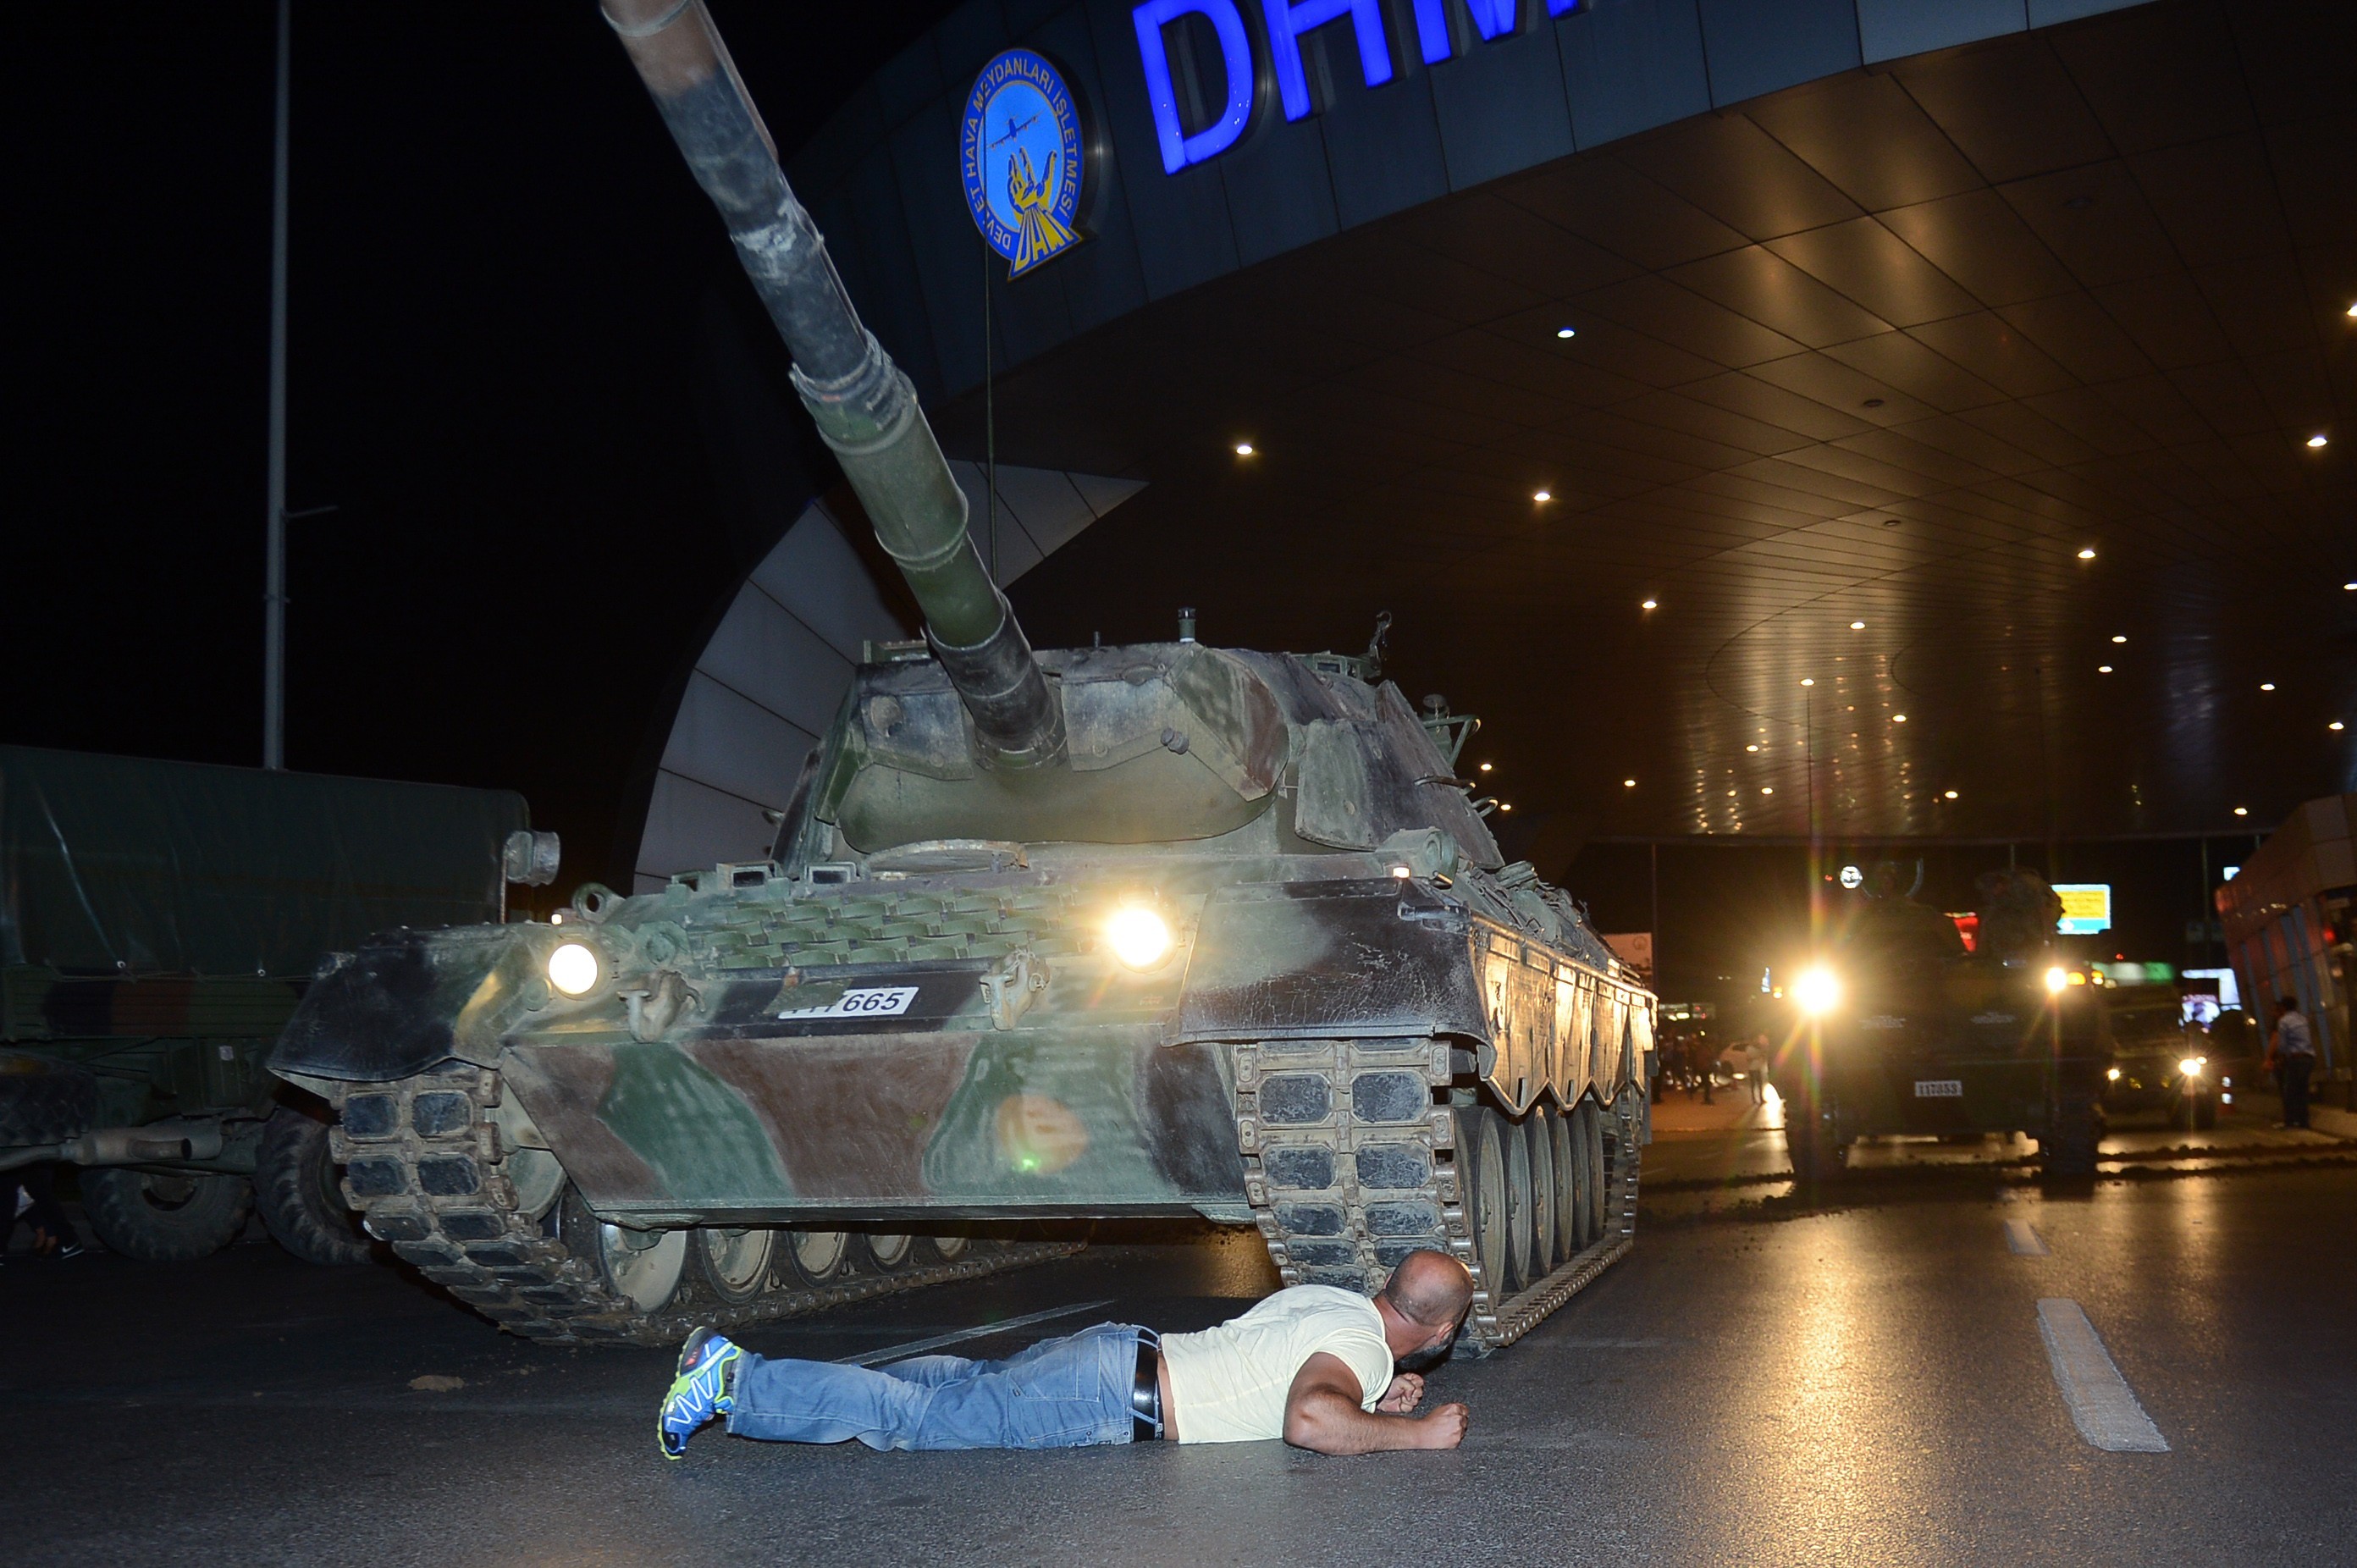 Metin Doğan, who laid down in front of a tank and became one of the many symbols of that night, said that coup soldiers threatened to shoot him if he did not back down, to which he responded: “I’m a Turkish soldier. Who are you?”